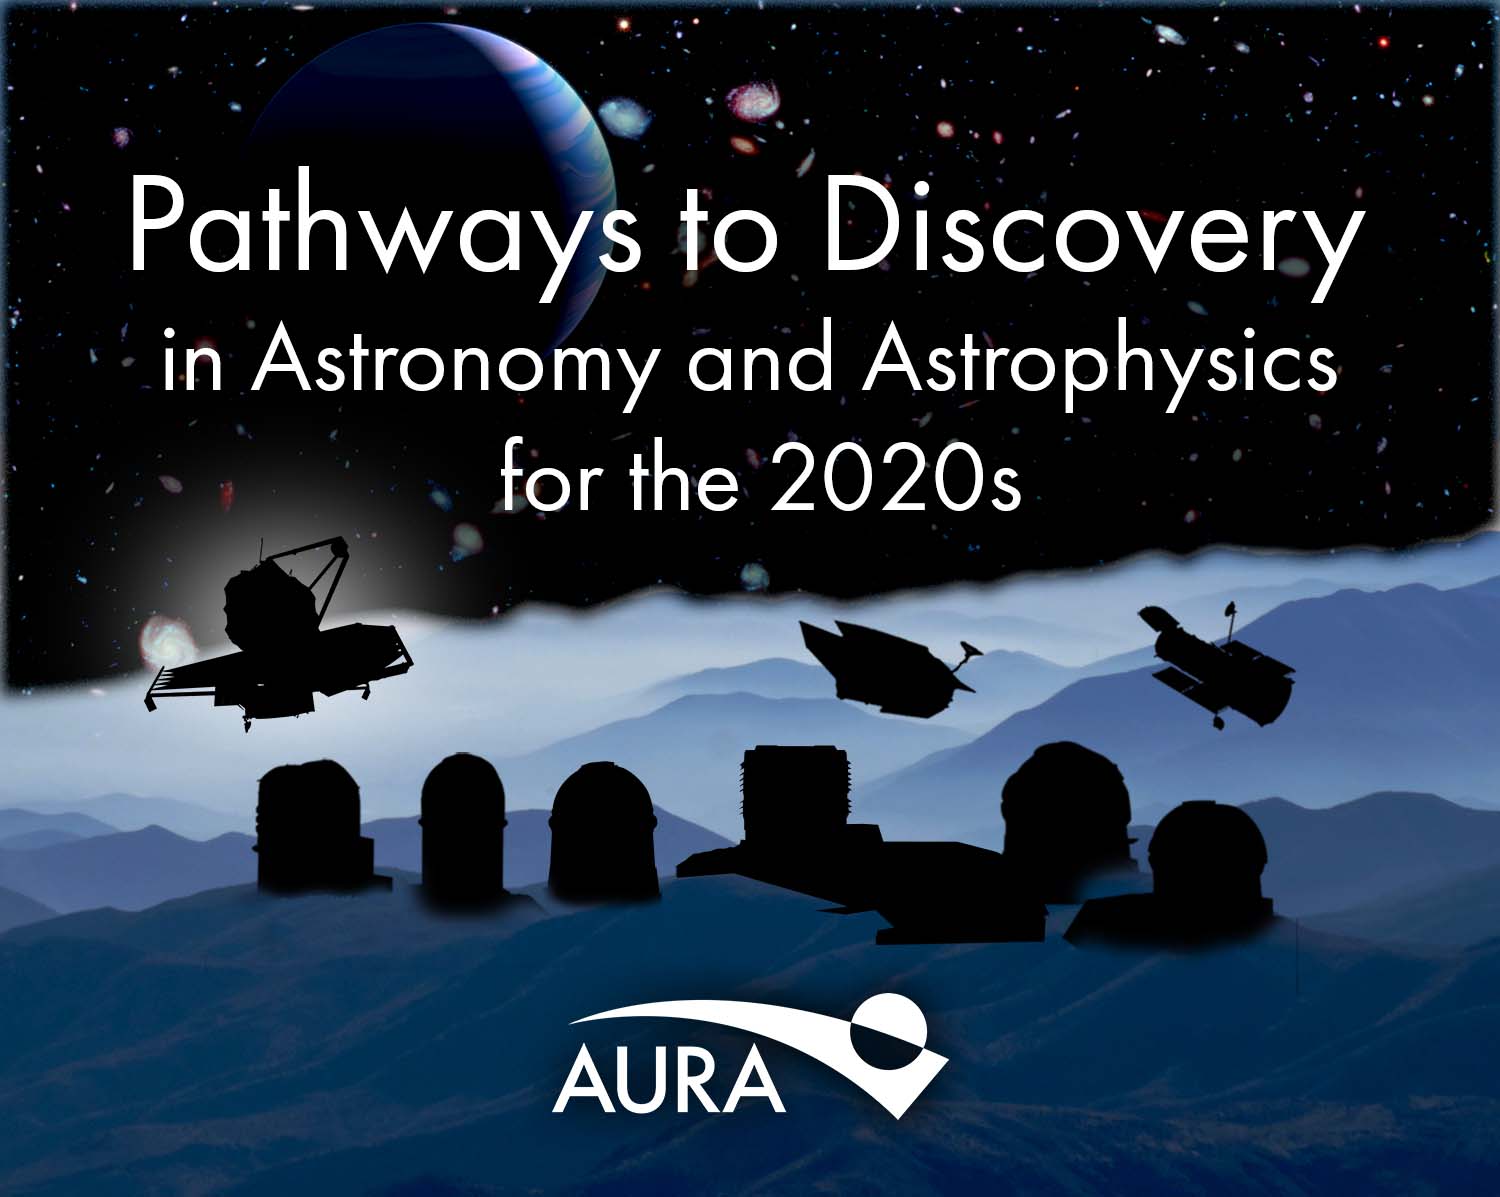 AURA observatories look to the future